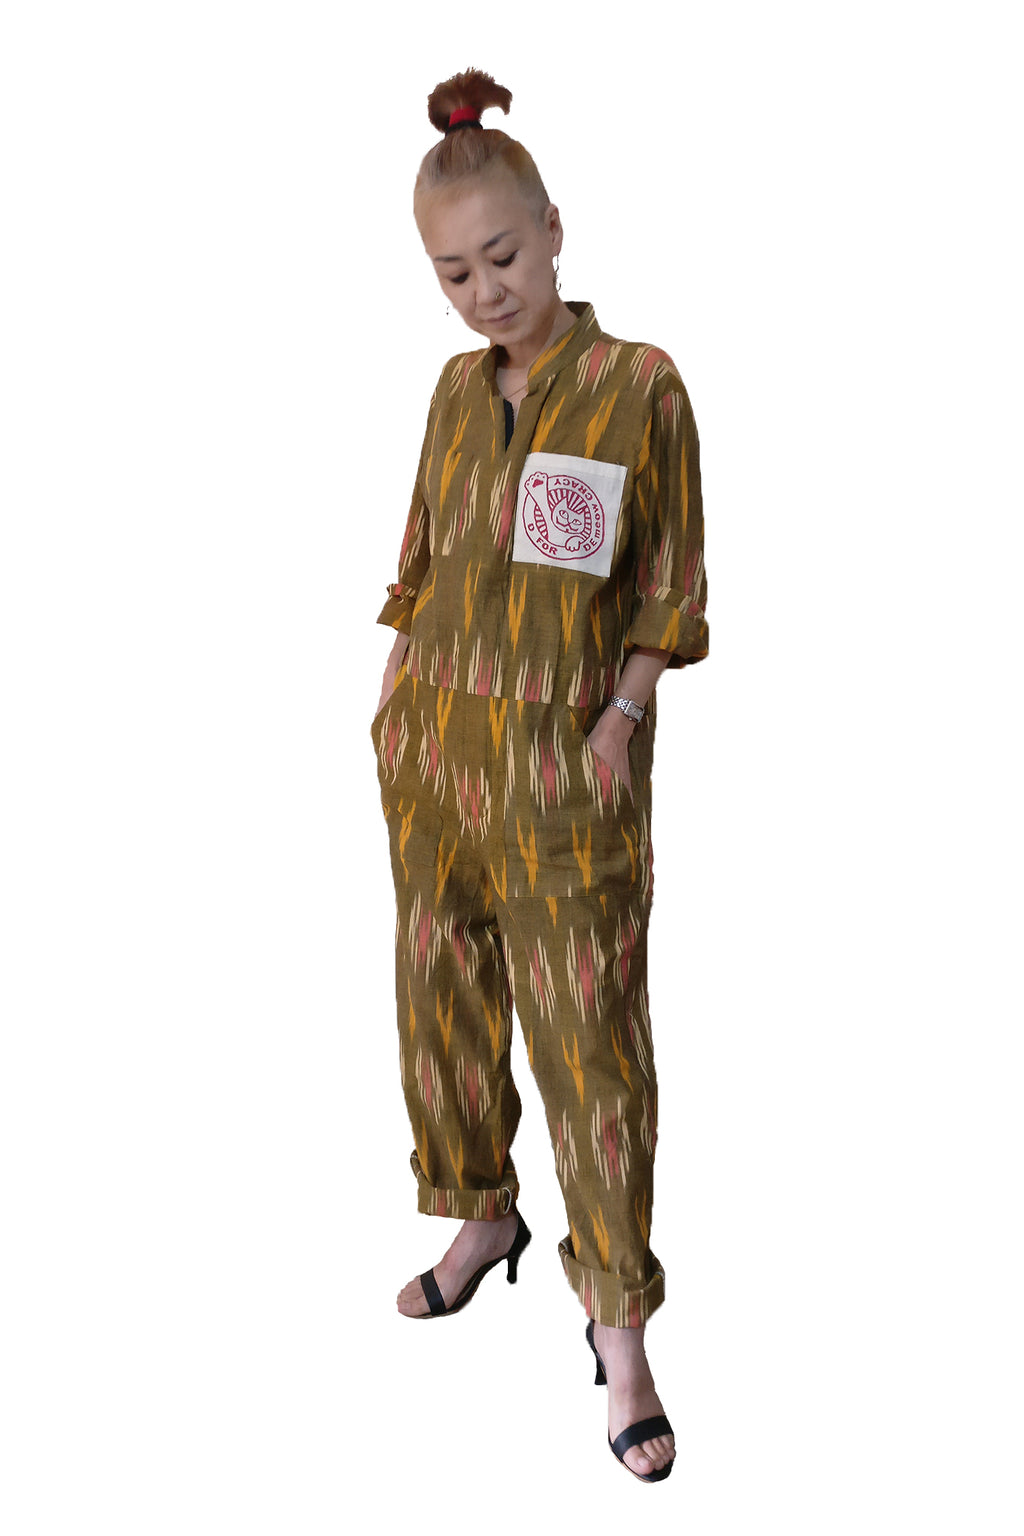 Classic boiler suit (coverall) for daily wear with an Indian traditional fabric, yellow handloom cotton Ikat, for all the bodies (unisex) and body types! The oversized silhouette gives cool vibes. If you love jumpsuits, definitely try this! Shop online. - Woman model